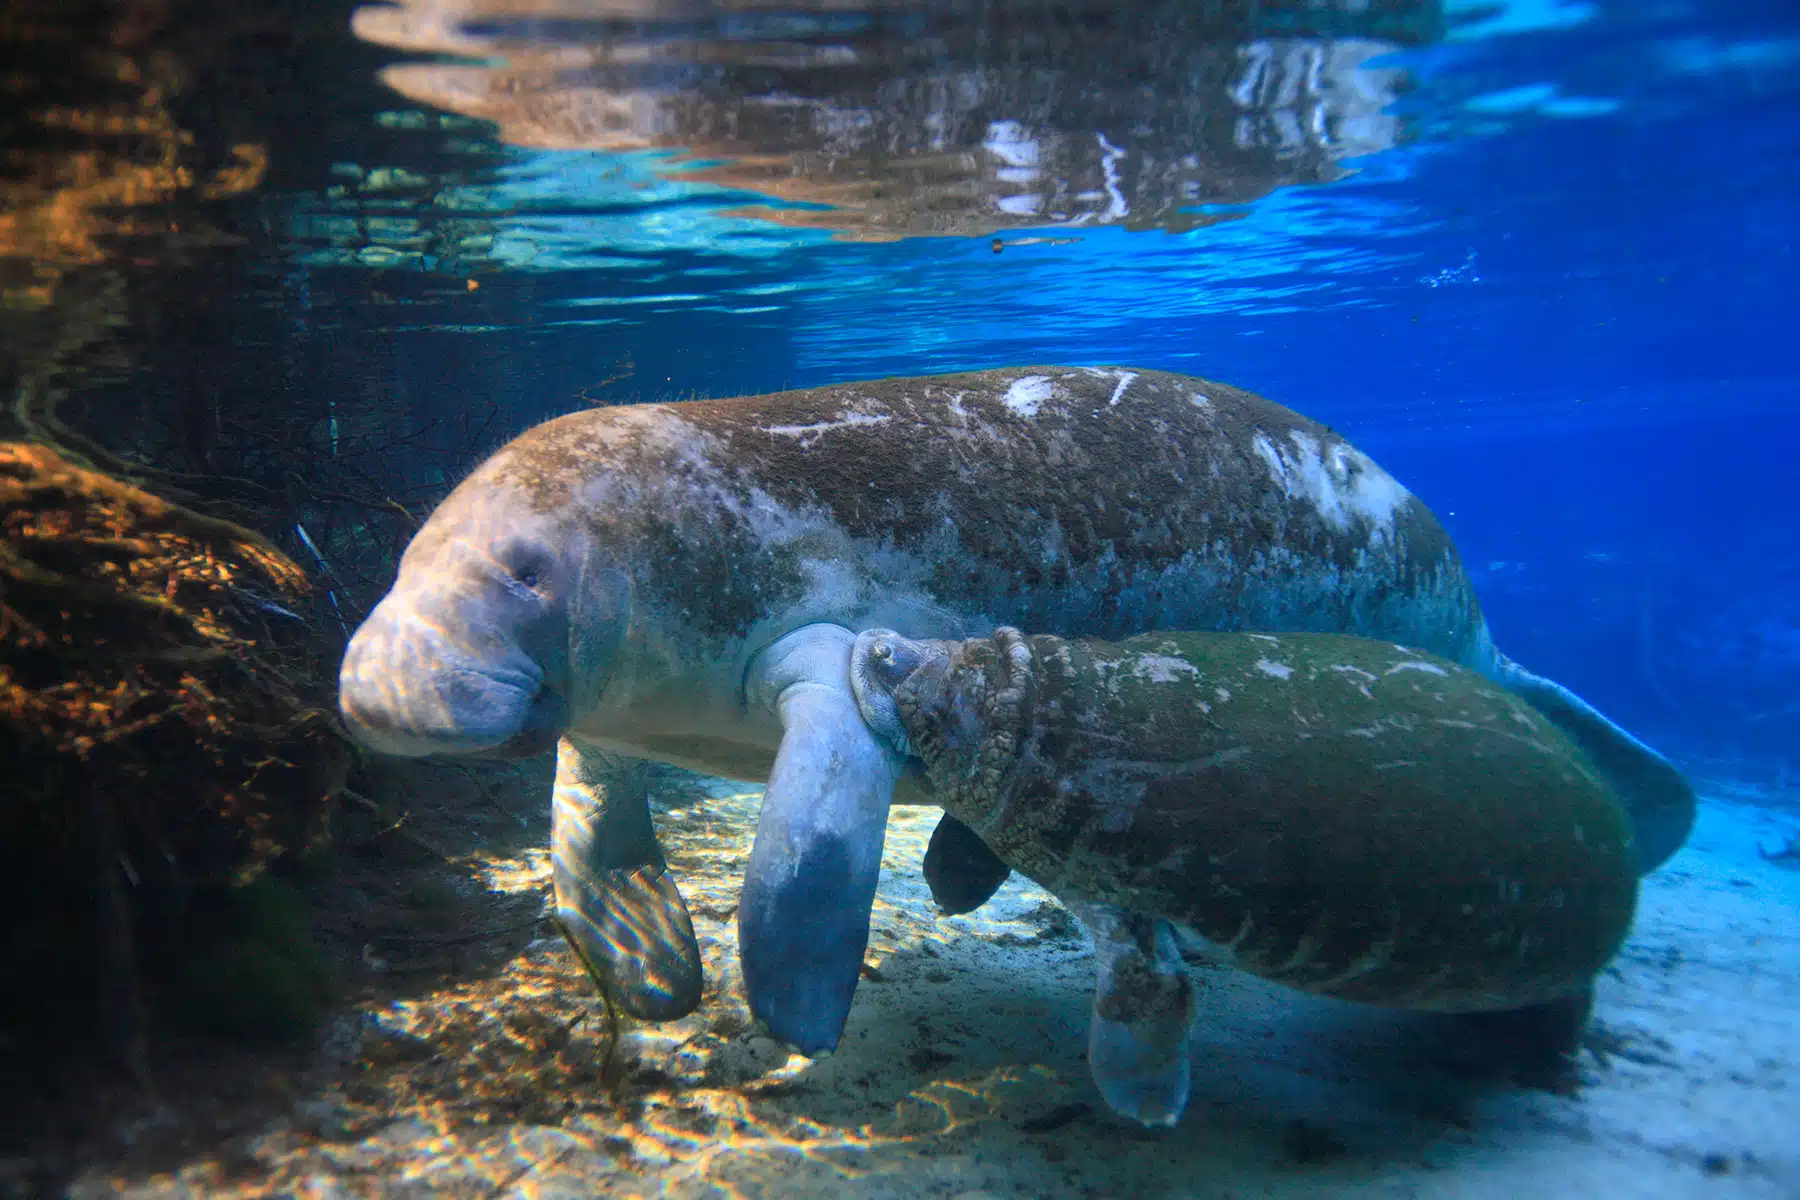 A manatee mother and calf